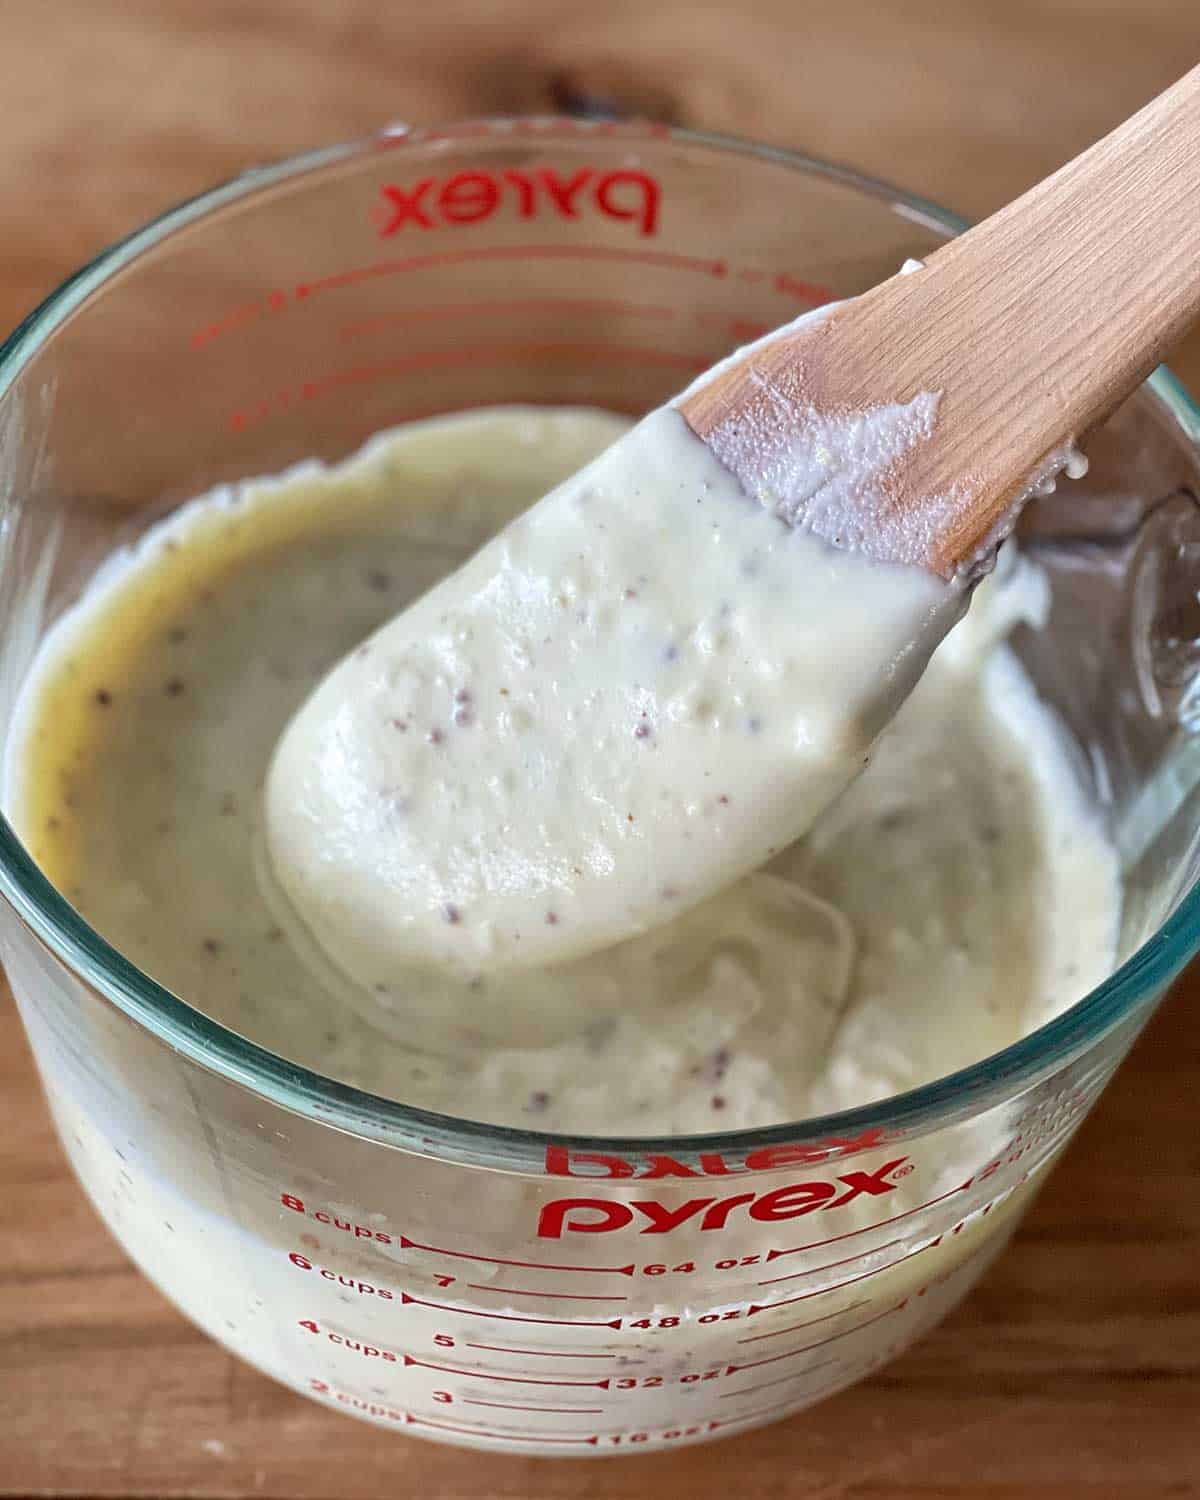 A close up of white sauce in a glass jug being stirred by a wooden spoon.